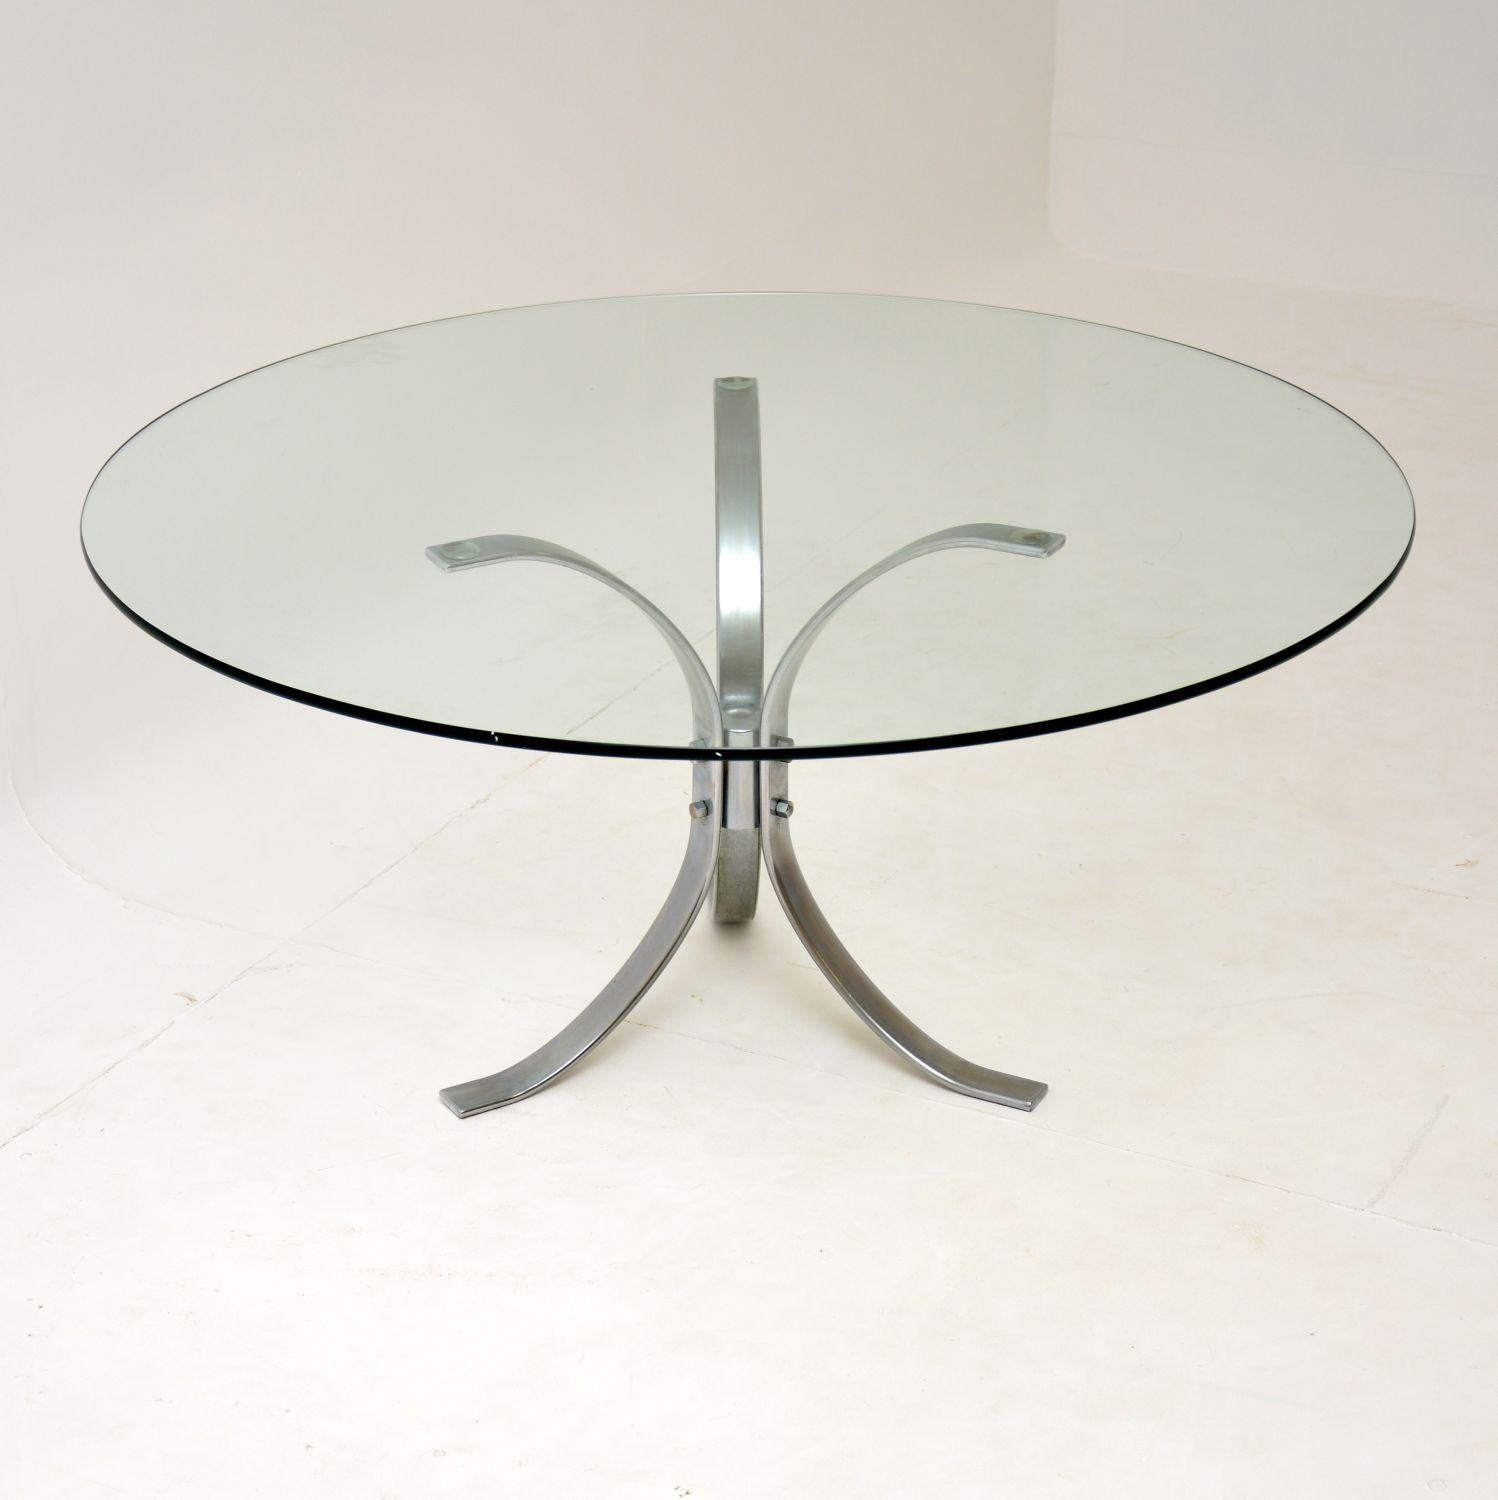 A beautifully designed vintage coffee table from the 1960s-1970s. This has a top quality chrome frame, with a loose circular glass top. The condition is excellent for its age, the frame has only some light surface wear. The glass is also in